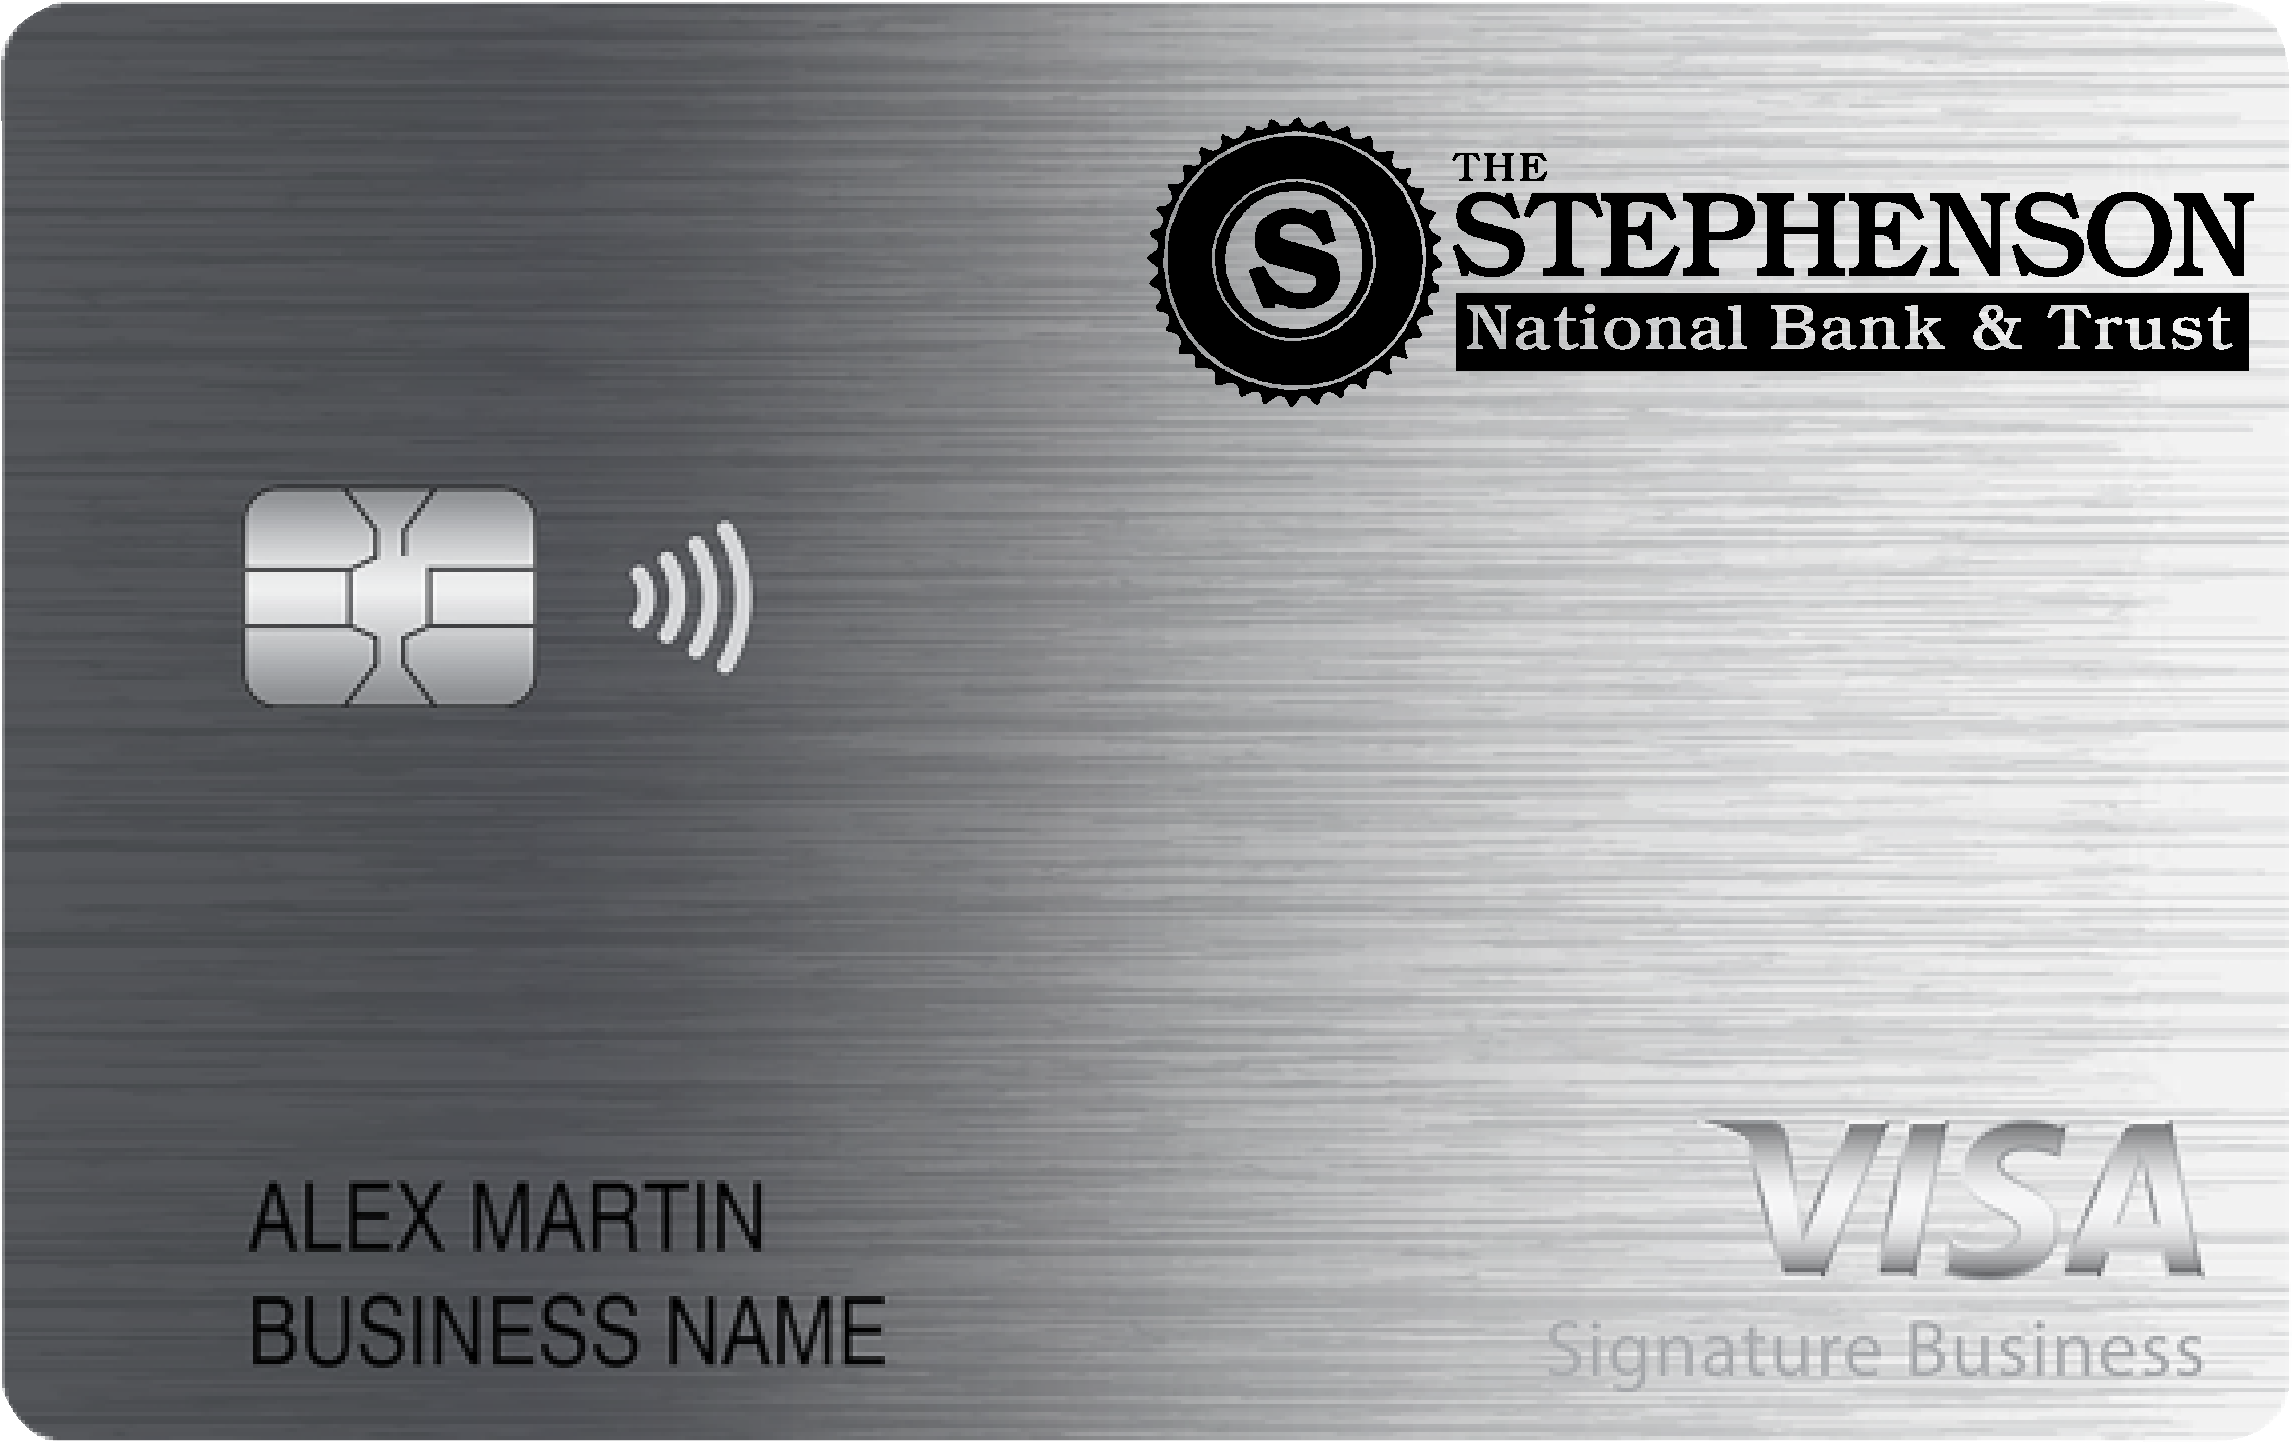 The Stephenson National Bank and Trust Smart Business Rewards Card